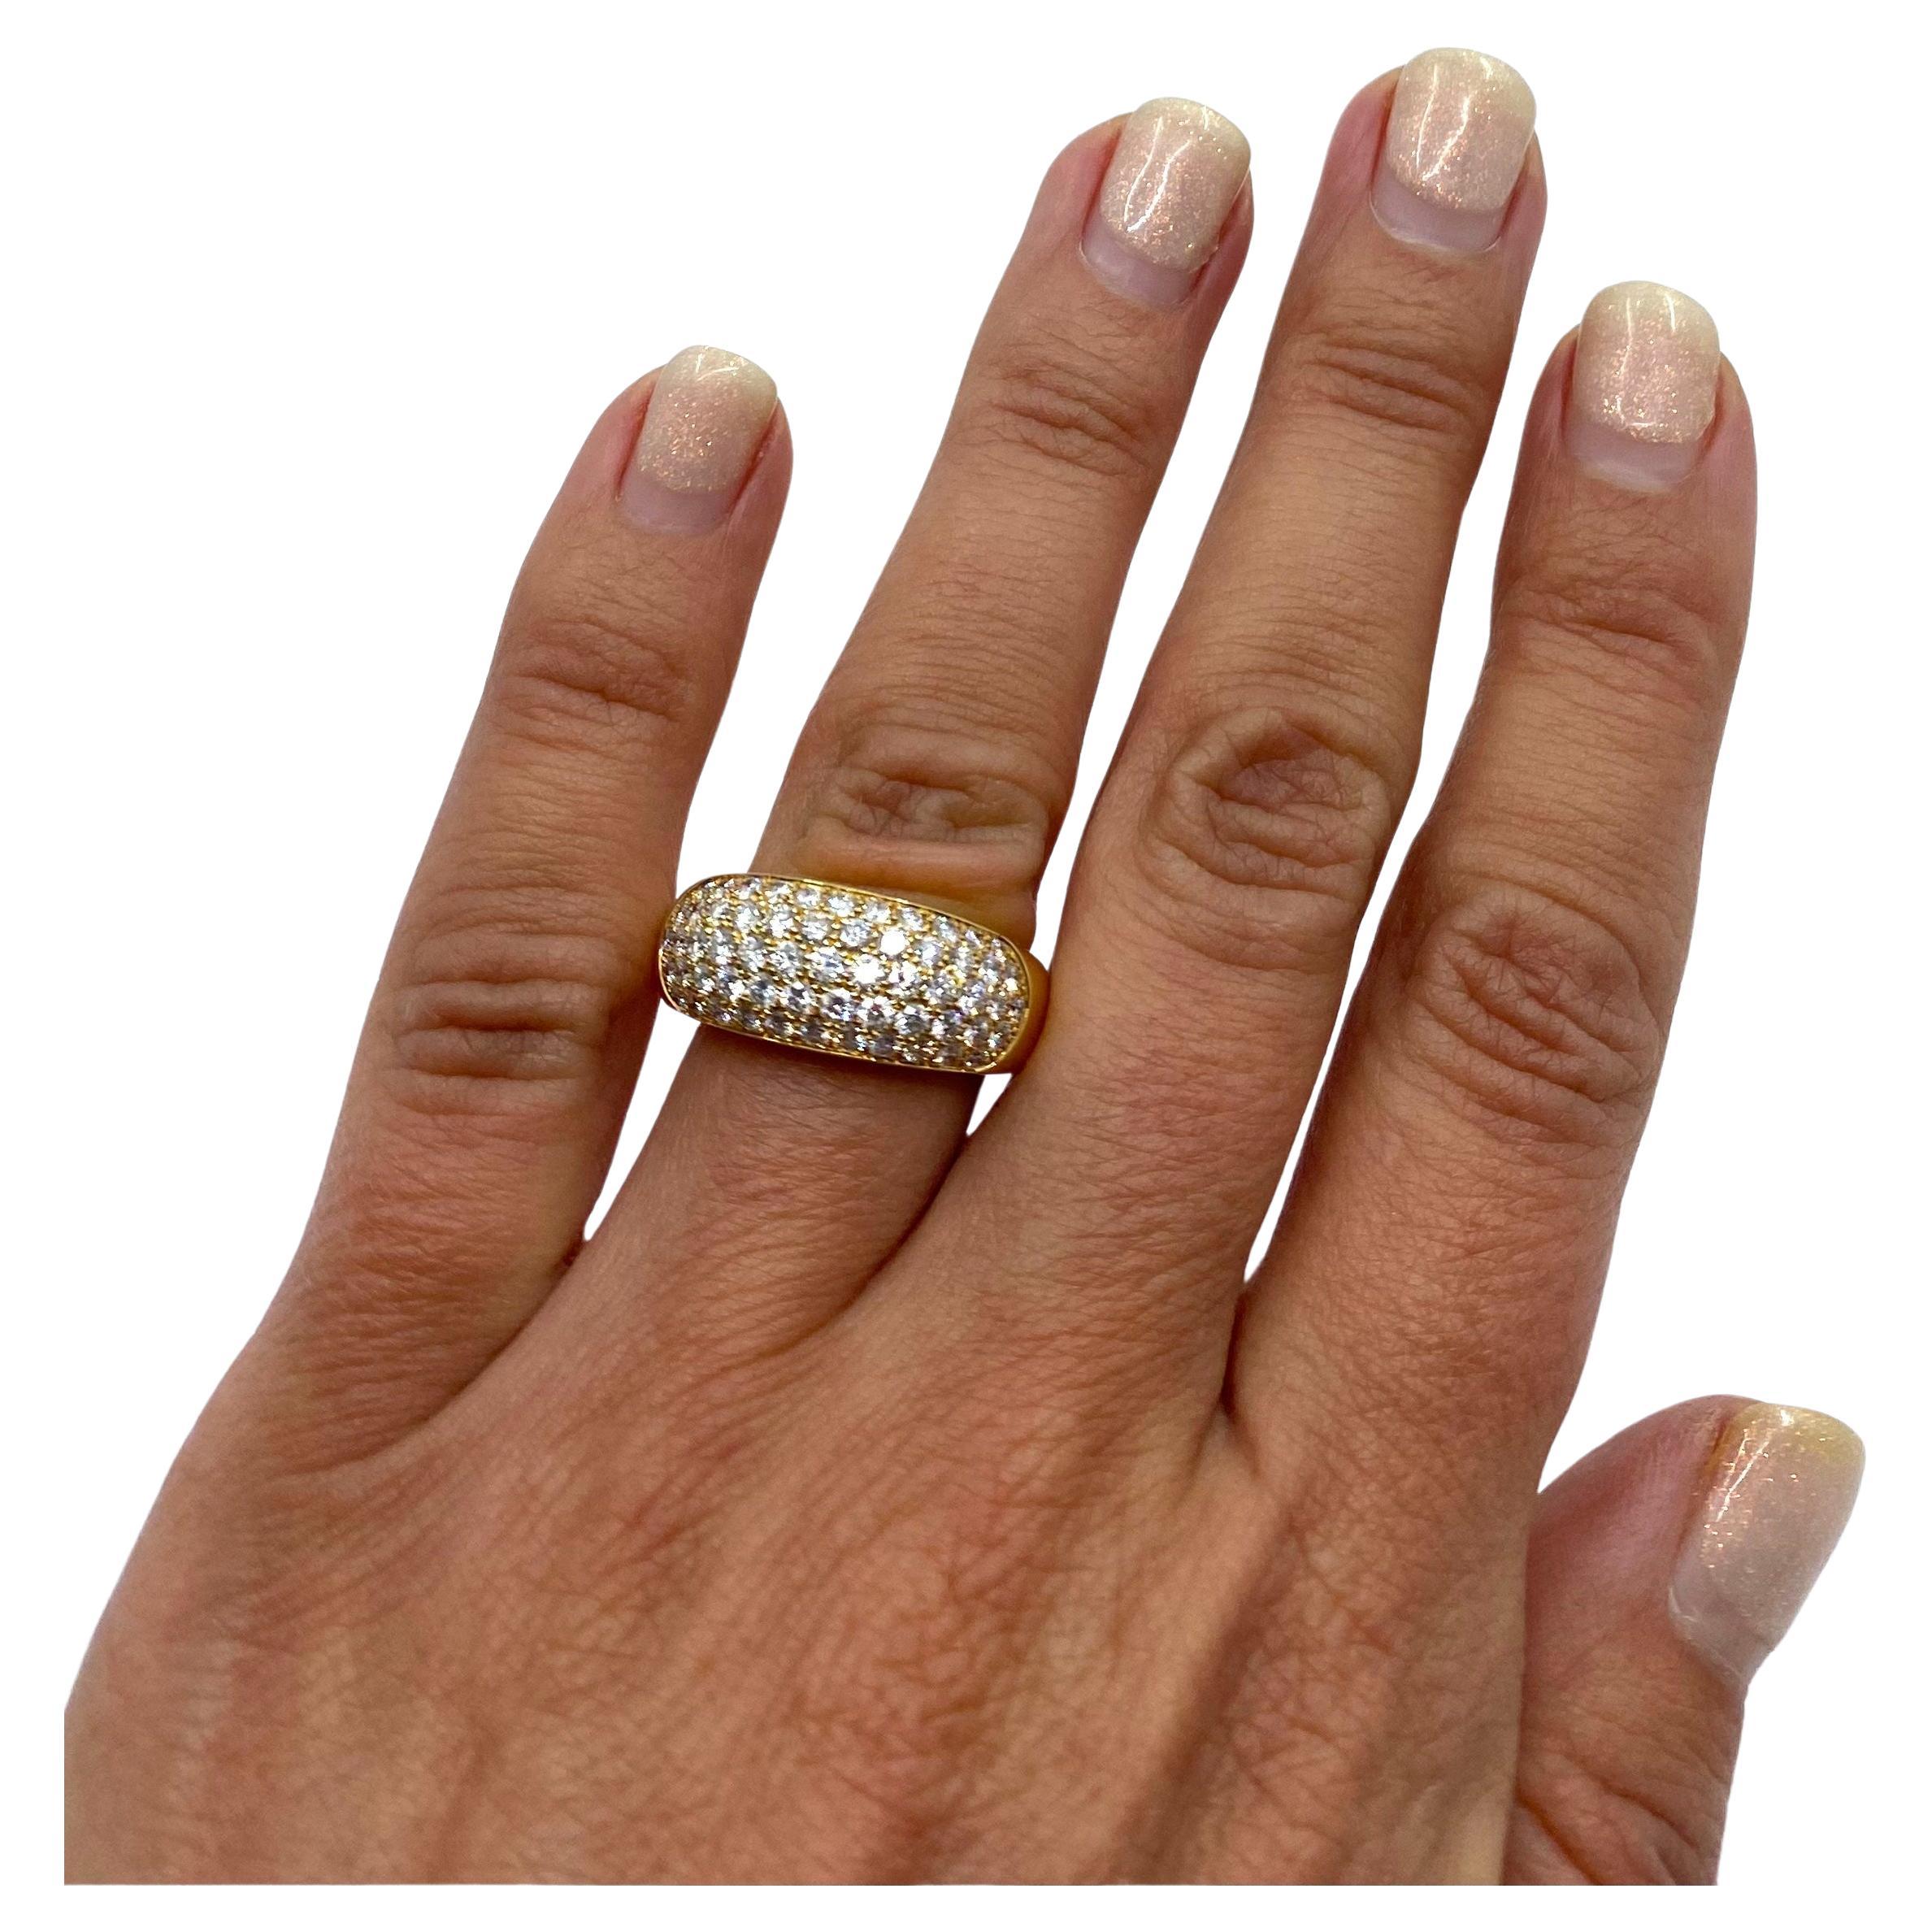 A classic Van Cleef & Arpels pave diamond 18k gold dome ring.  The dome has angled corners with the diamonds set in four rows. This design called “a boule ring”, which stands for the rings with a domed head embellished with pave gems. The term came